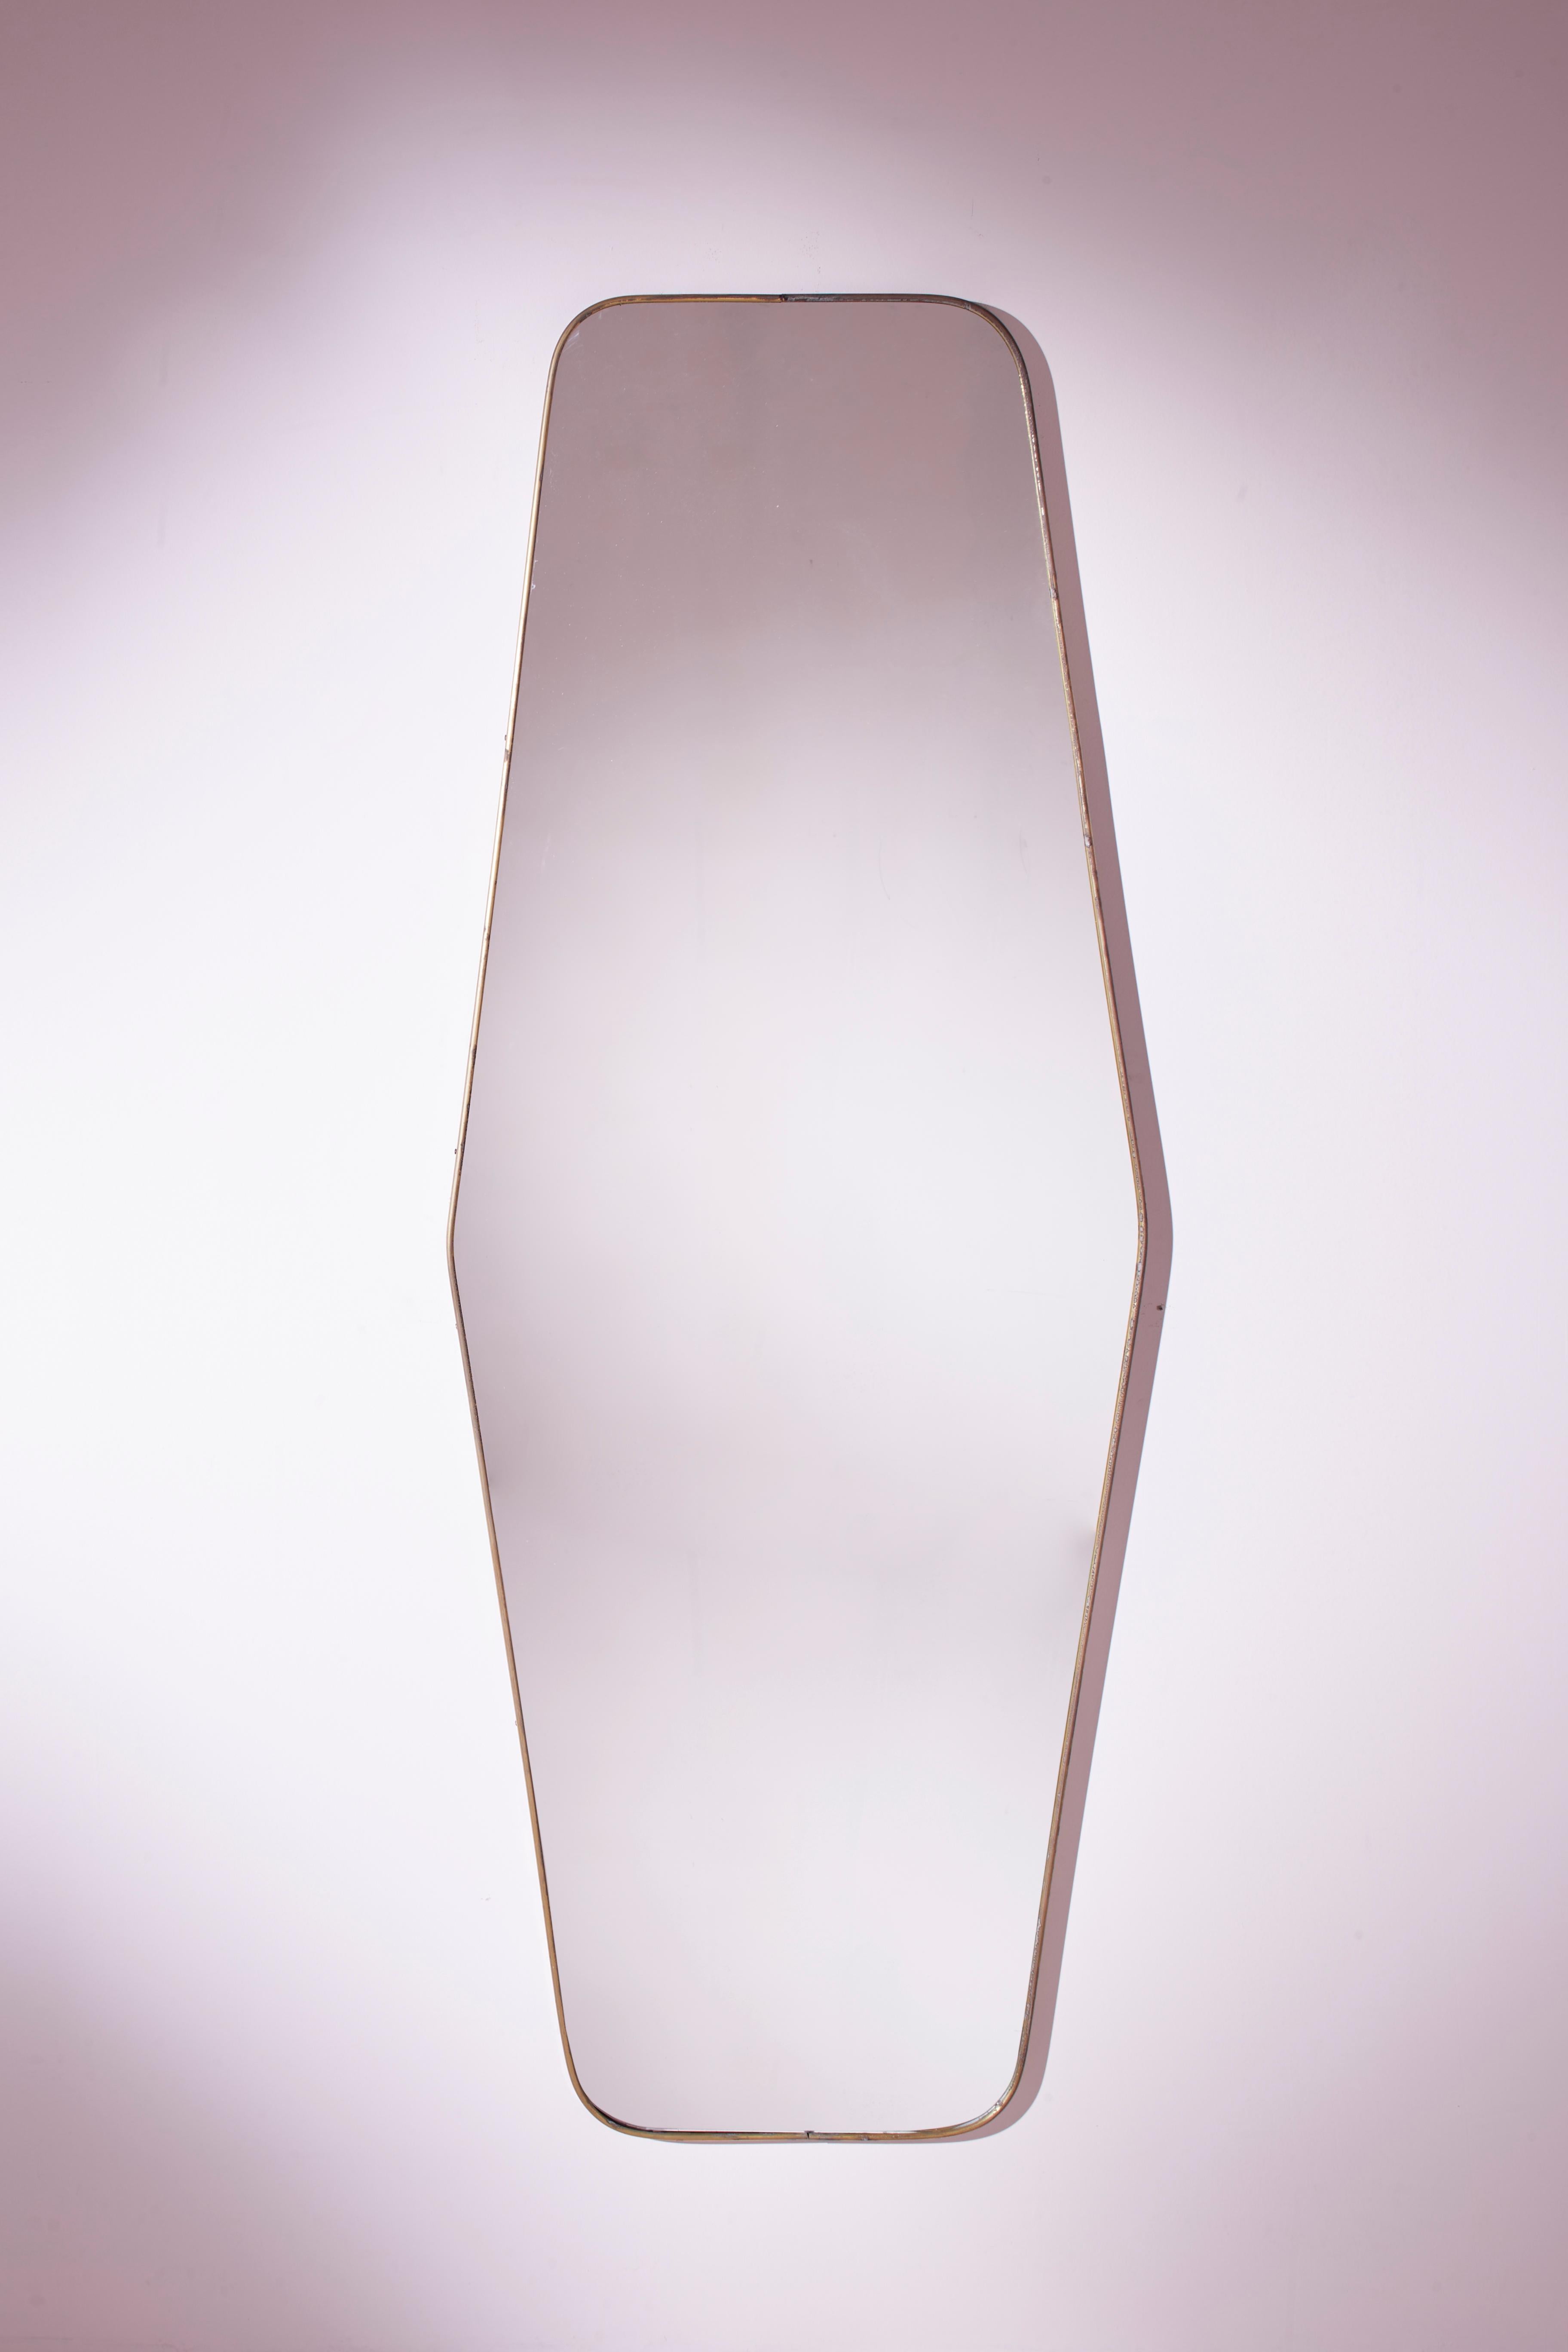 An impressive Italian brass wall mirror from the 1950s boasting an elegant elongated hexagonal shape.

This remarkable full-length mirror comprises an original plate from the 1950s, elevated by an light and modernist brass frame, making it a